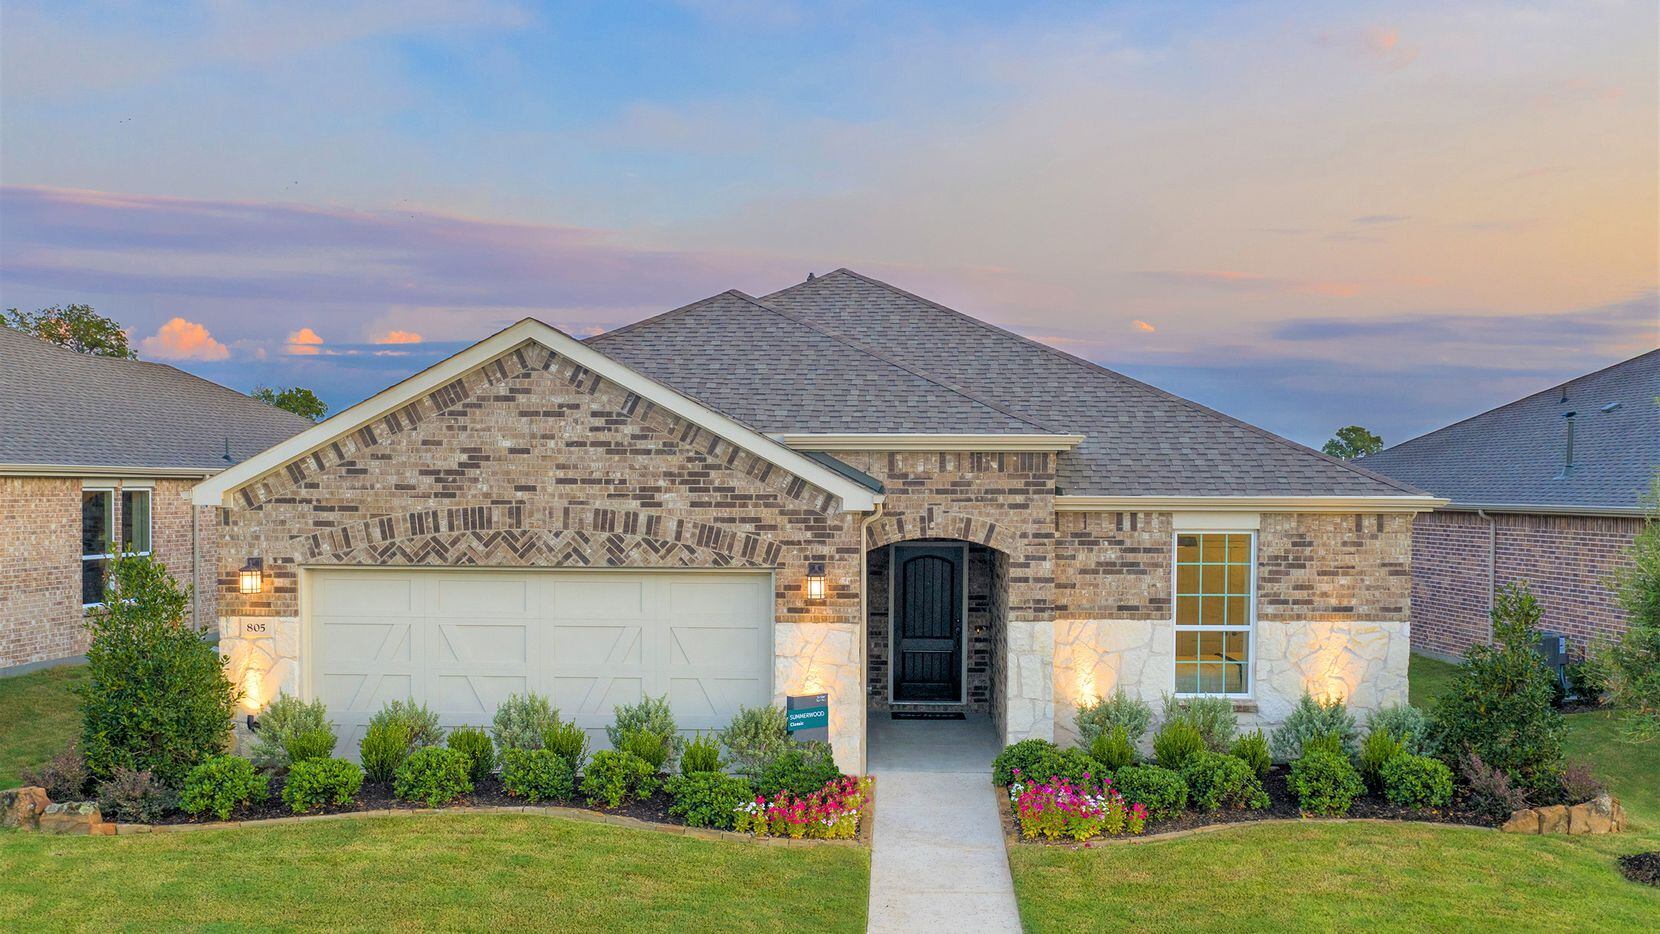 Models are open for touring daily at Del Webb at Union Park in Little Elm and Del Webb at...